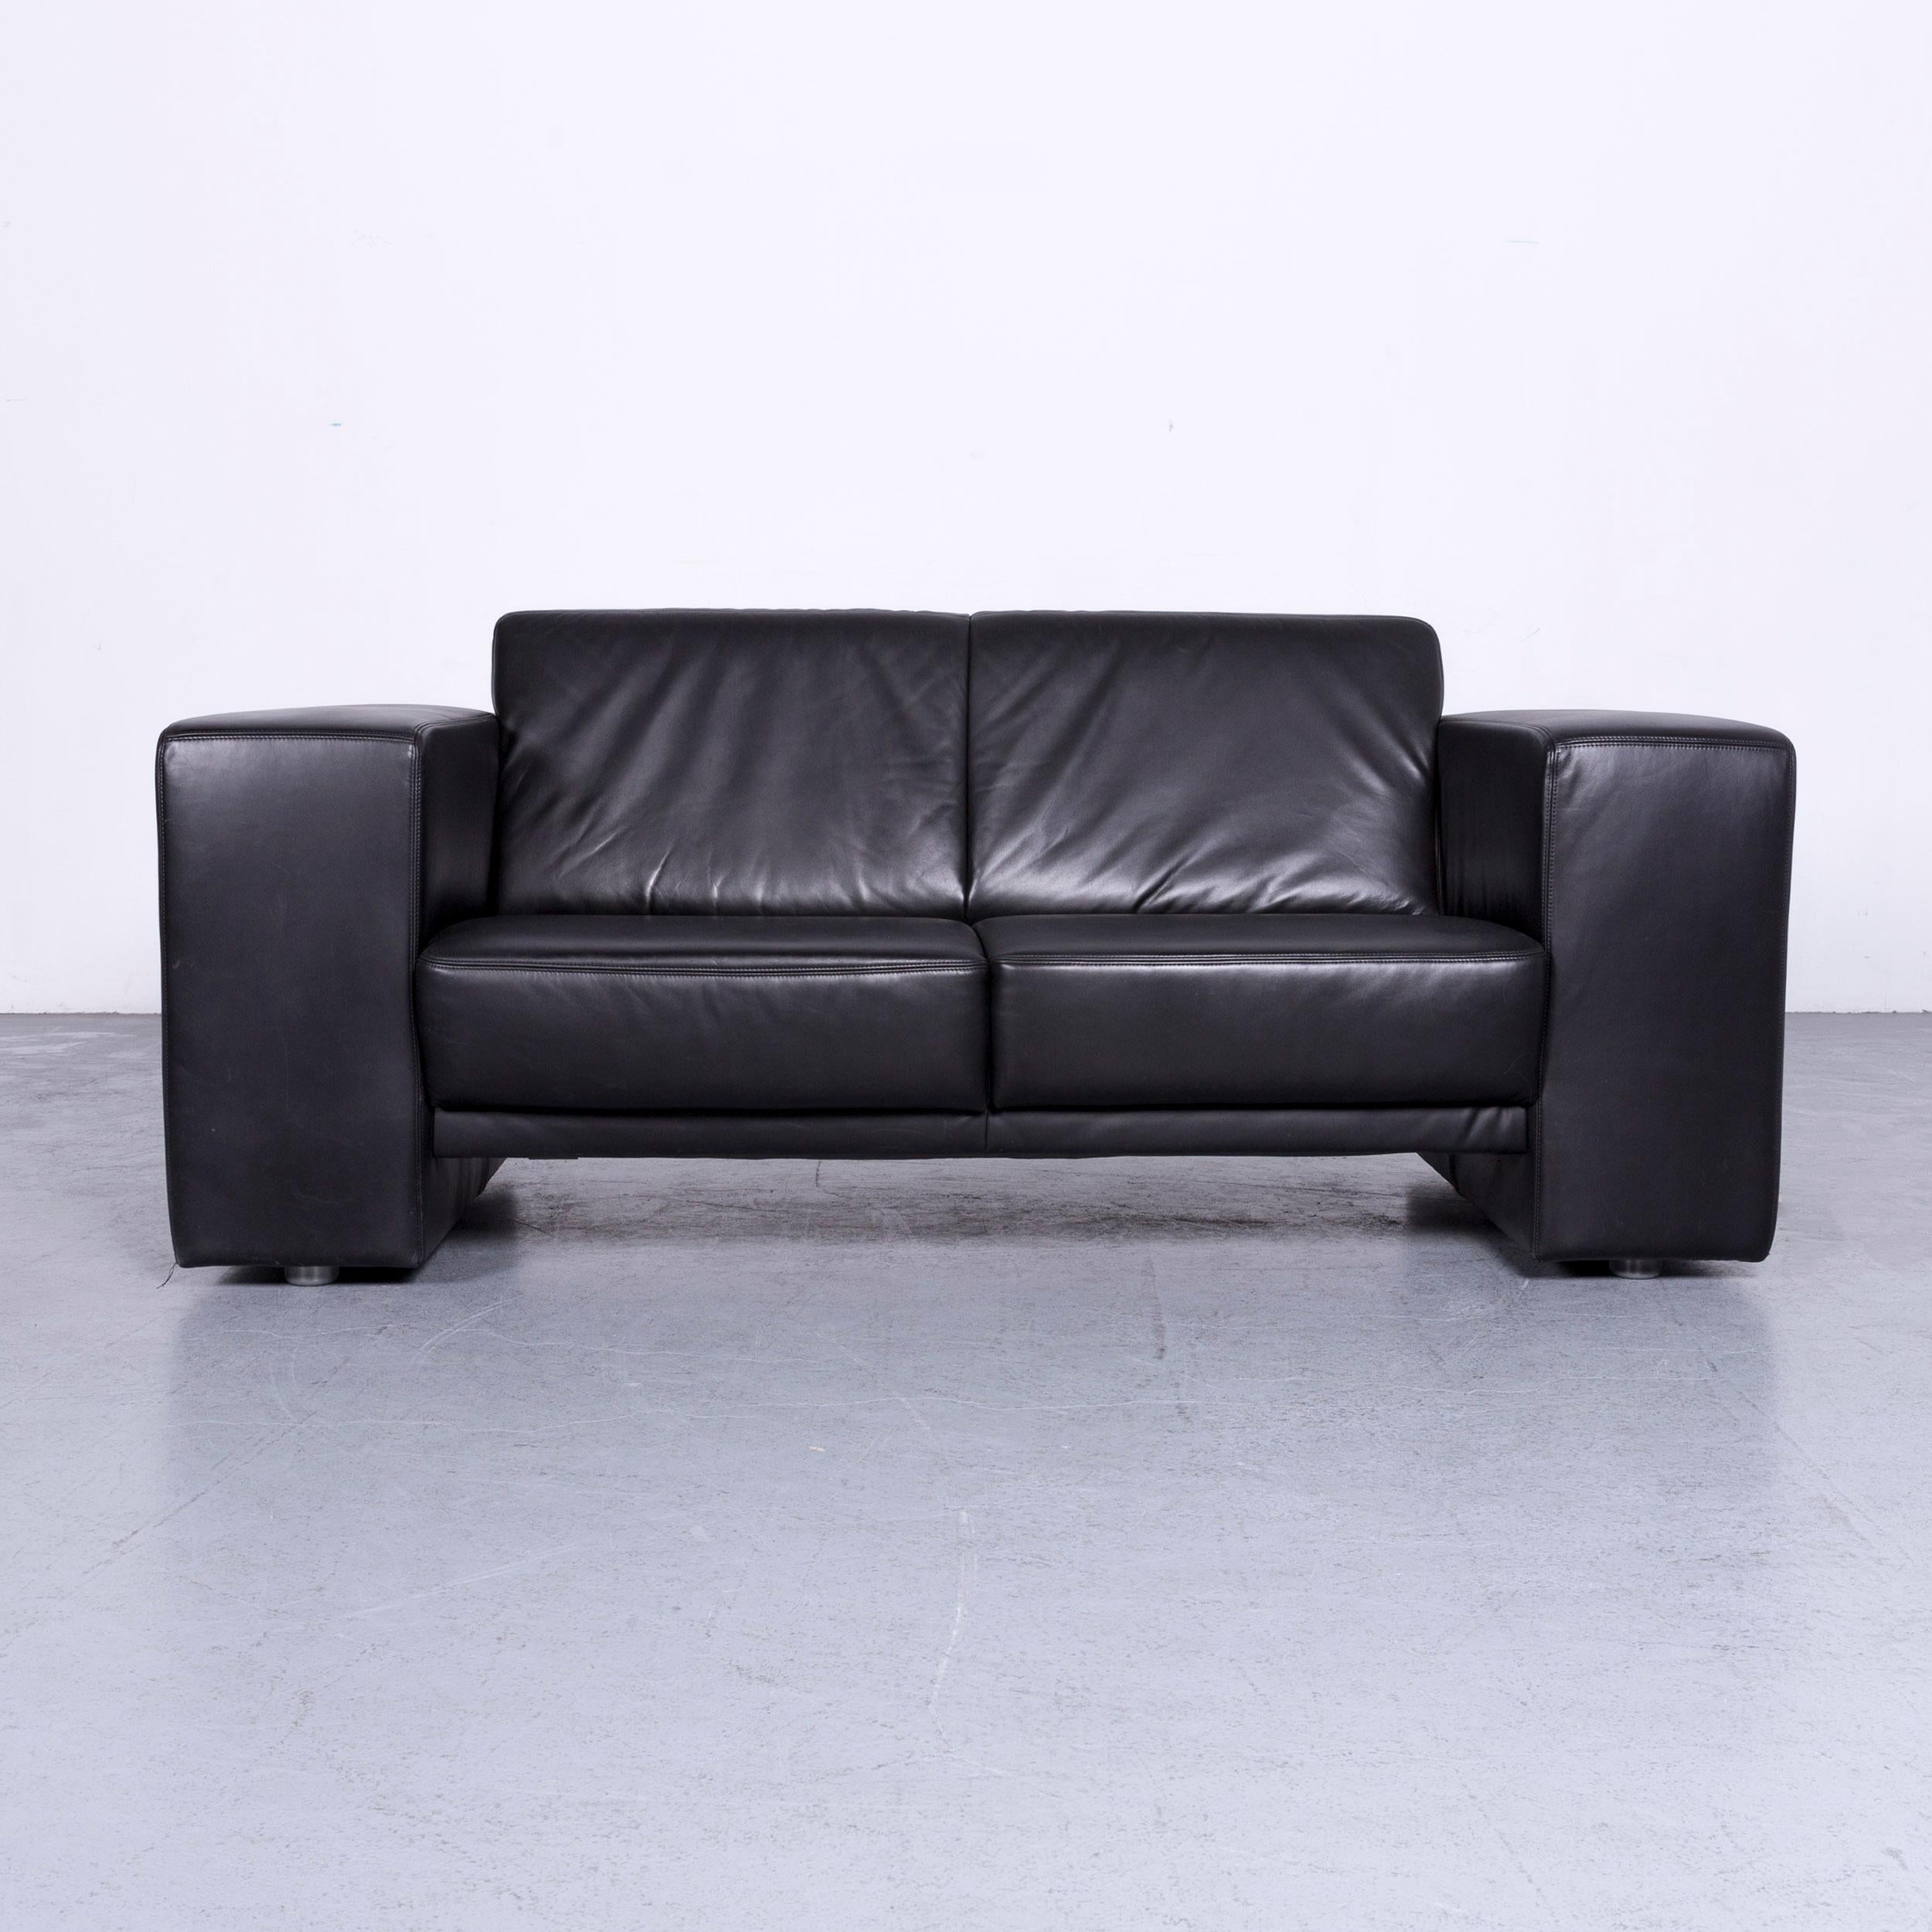 We bring to you a Koinor Rossini designer leather sofa black two-seat couch.